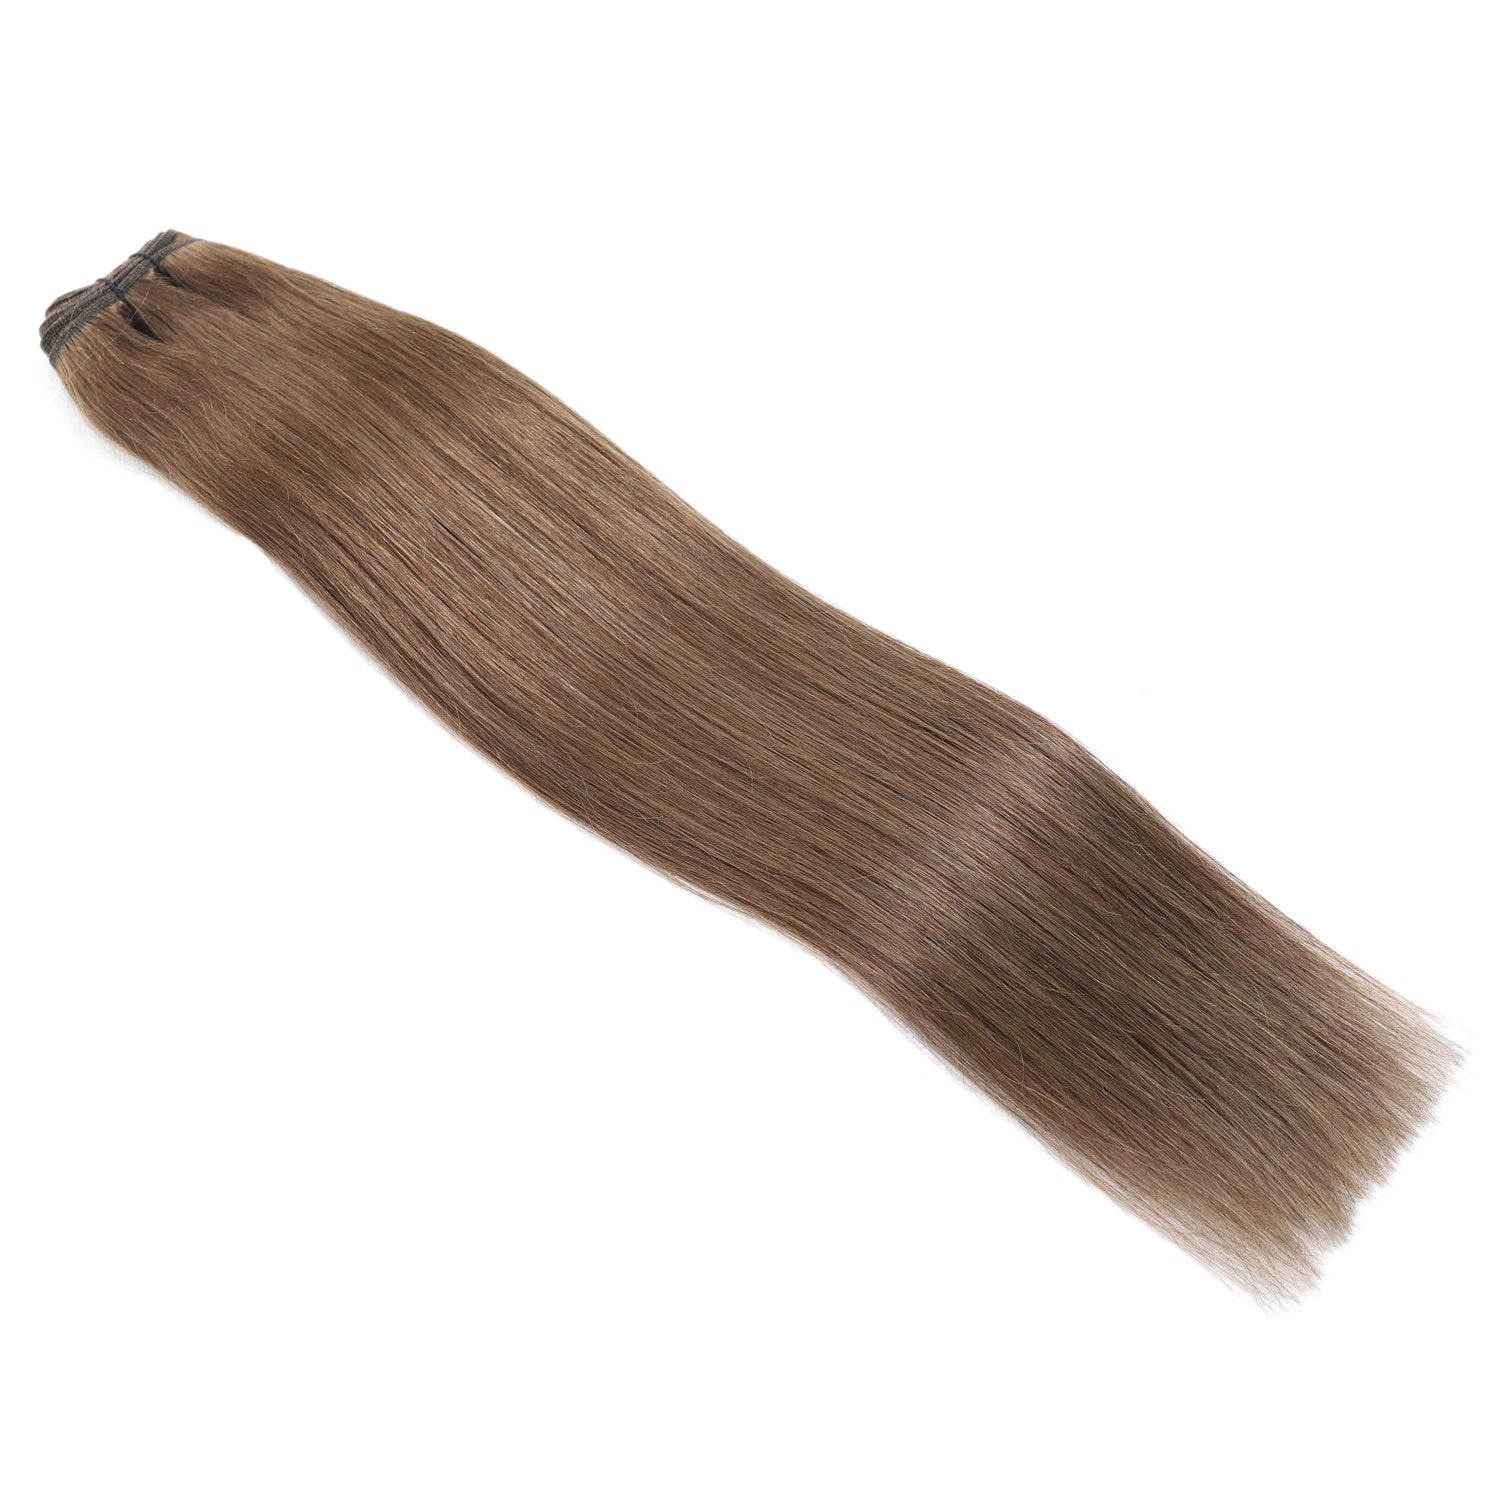 Weave Hair Extensions ensuring a high-quality, perfect match.